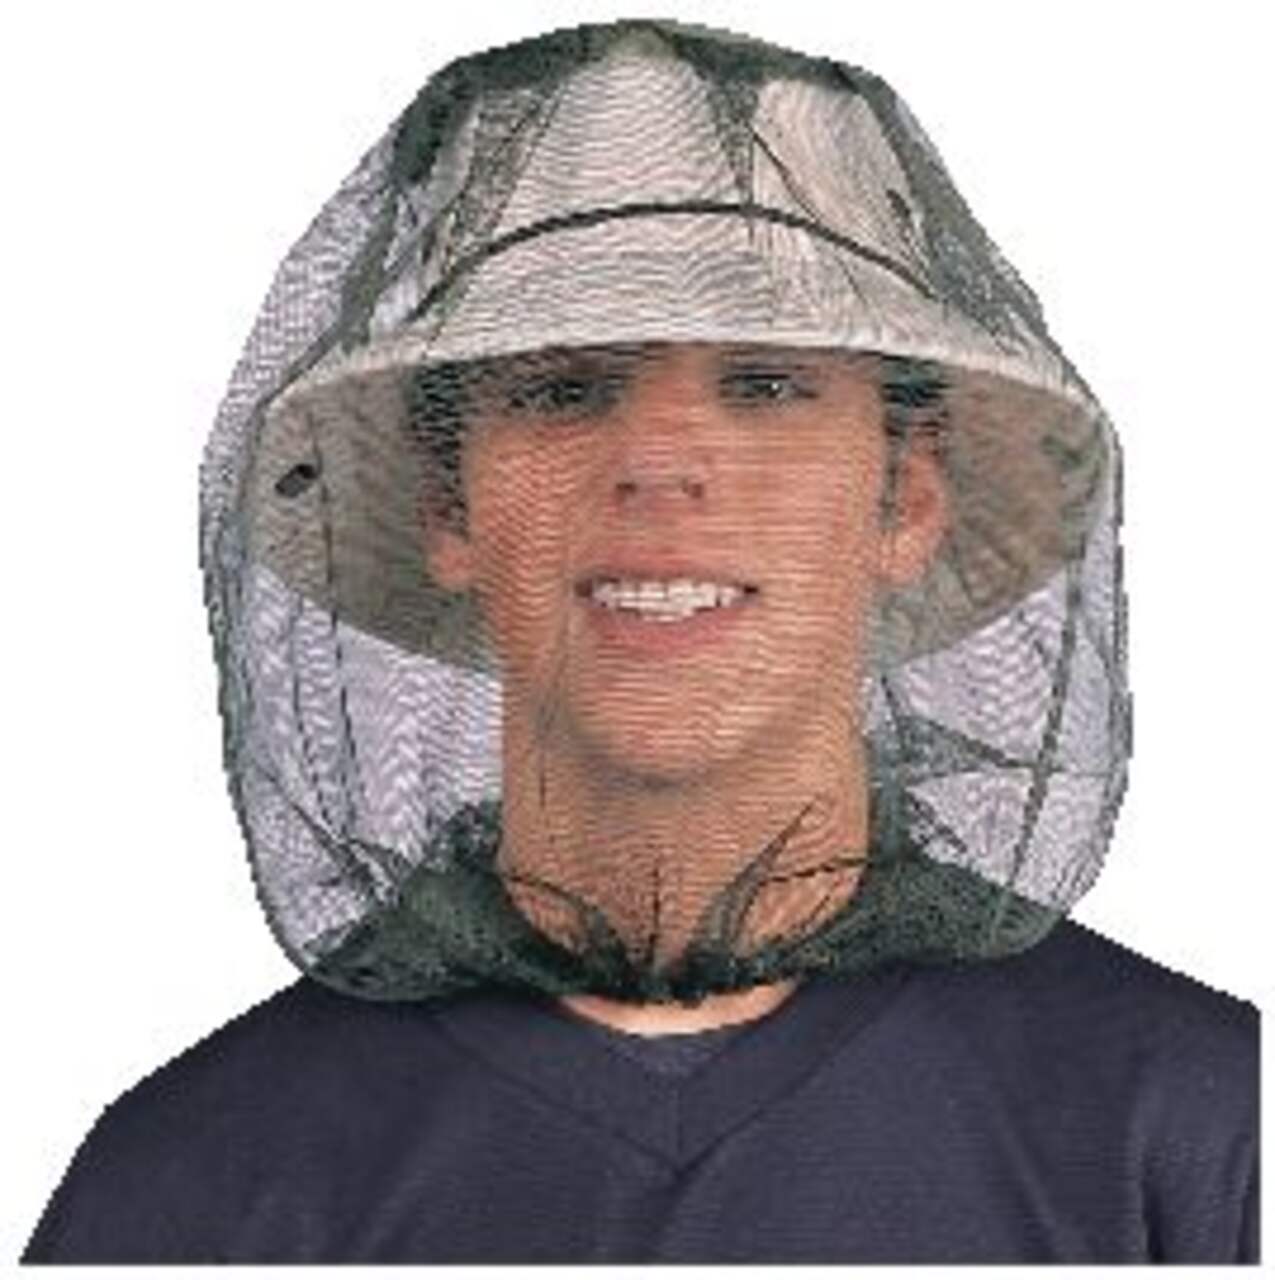 Youth Bug-Resistant Mesh Head Net for Camping/Fishing/Hiking